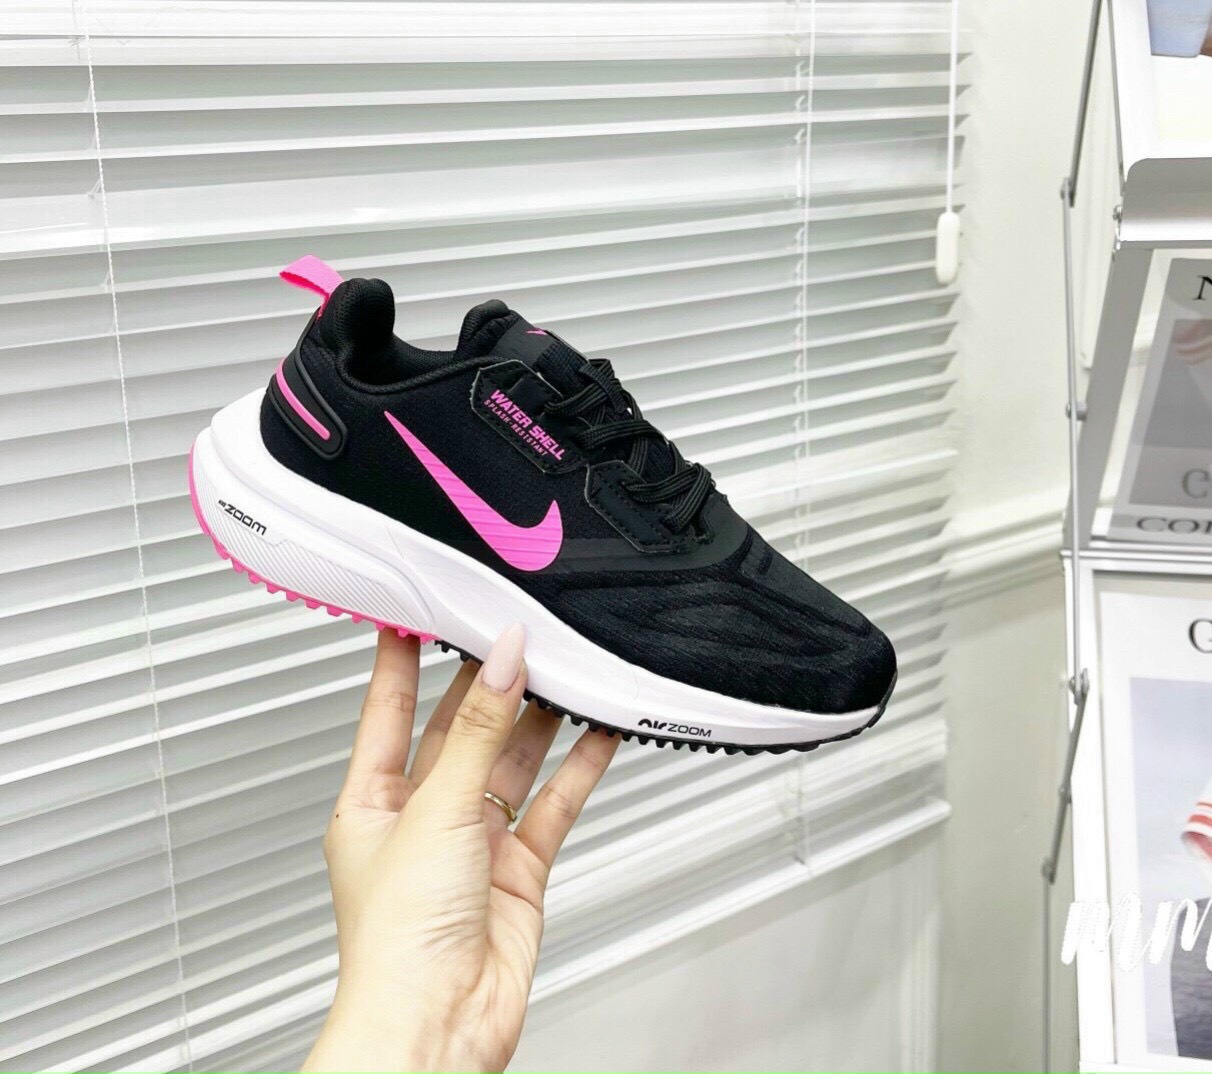 Giày Nike Zoom Water Shell Đen Rep 1:1